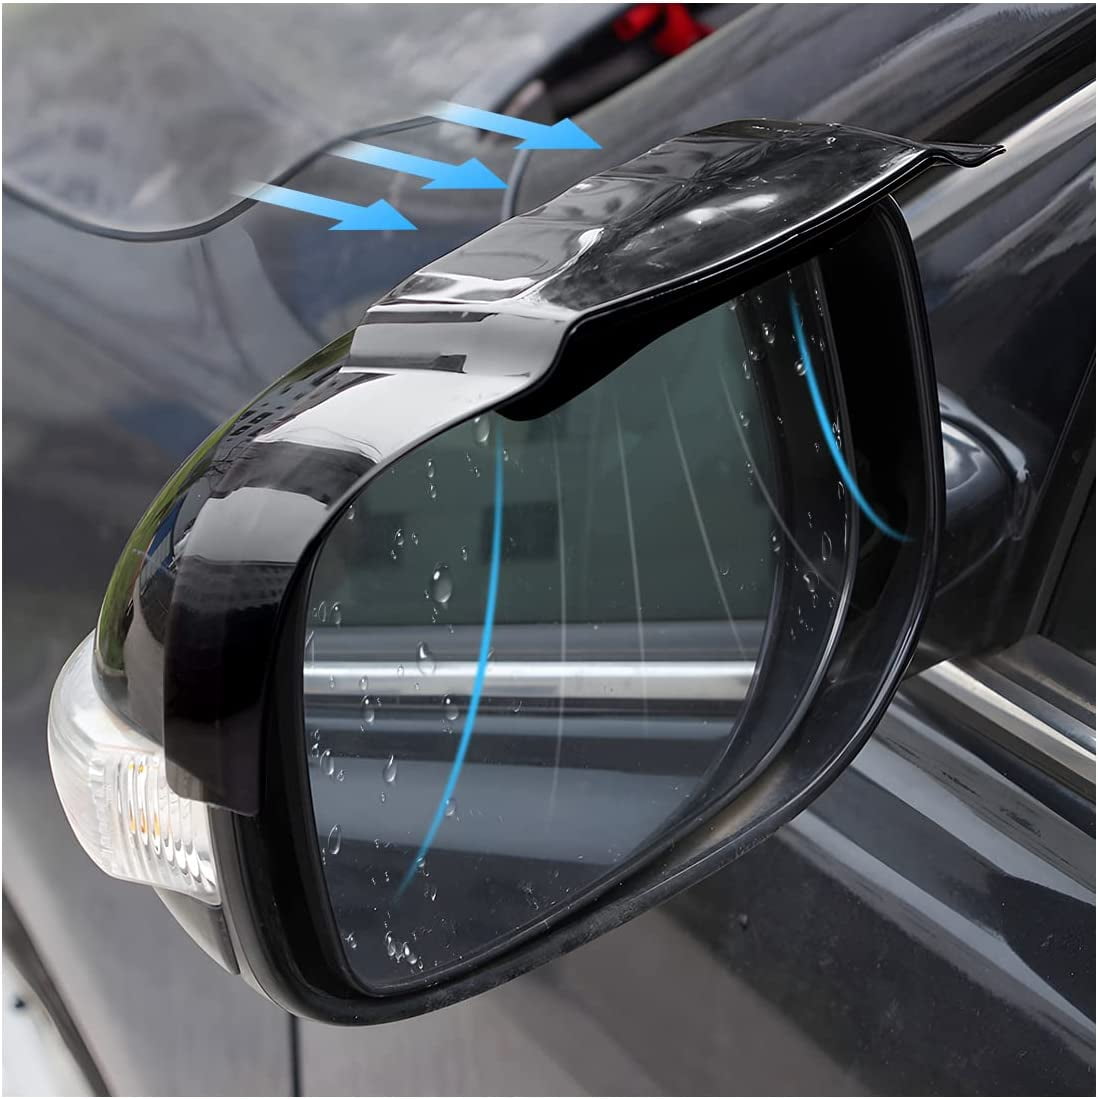 AWOKZA Flexible Car Rear View Side Mirror Anti Rain Visor Snow Guard  Weather Shield Sun Shade Cover Rearview for Most Car, Truck and SUV Auto  Accessories. : : Car & Motorbike